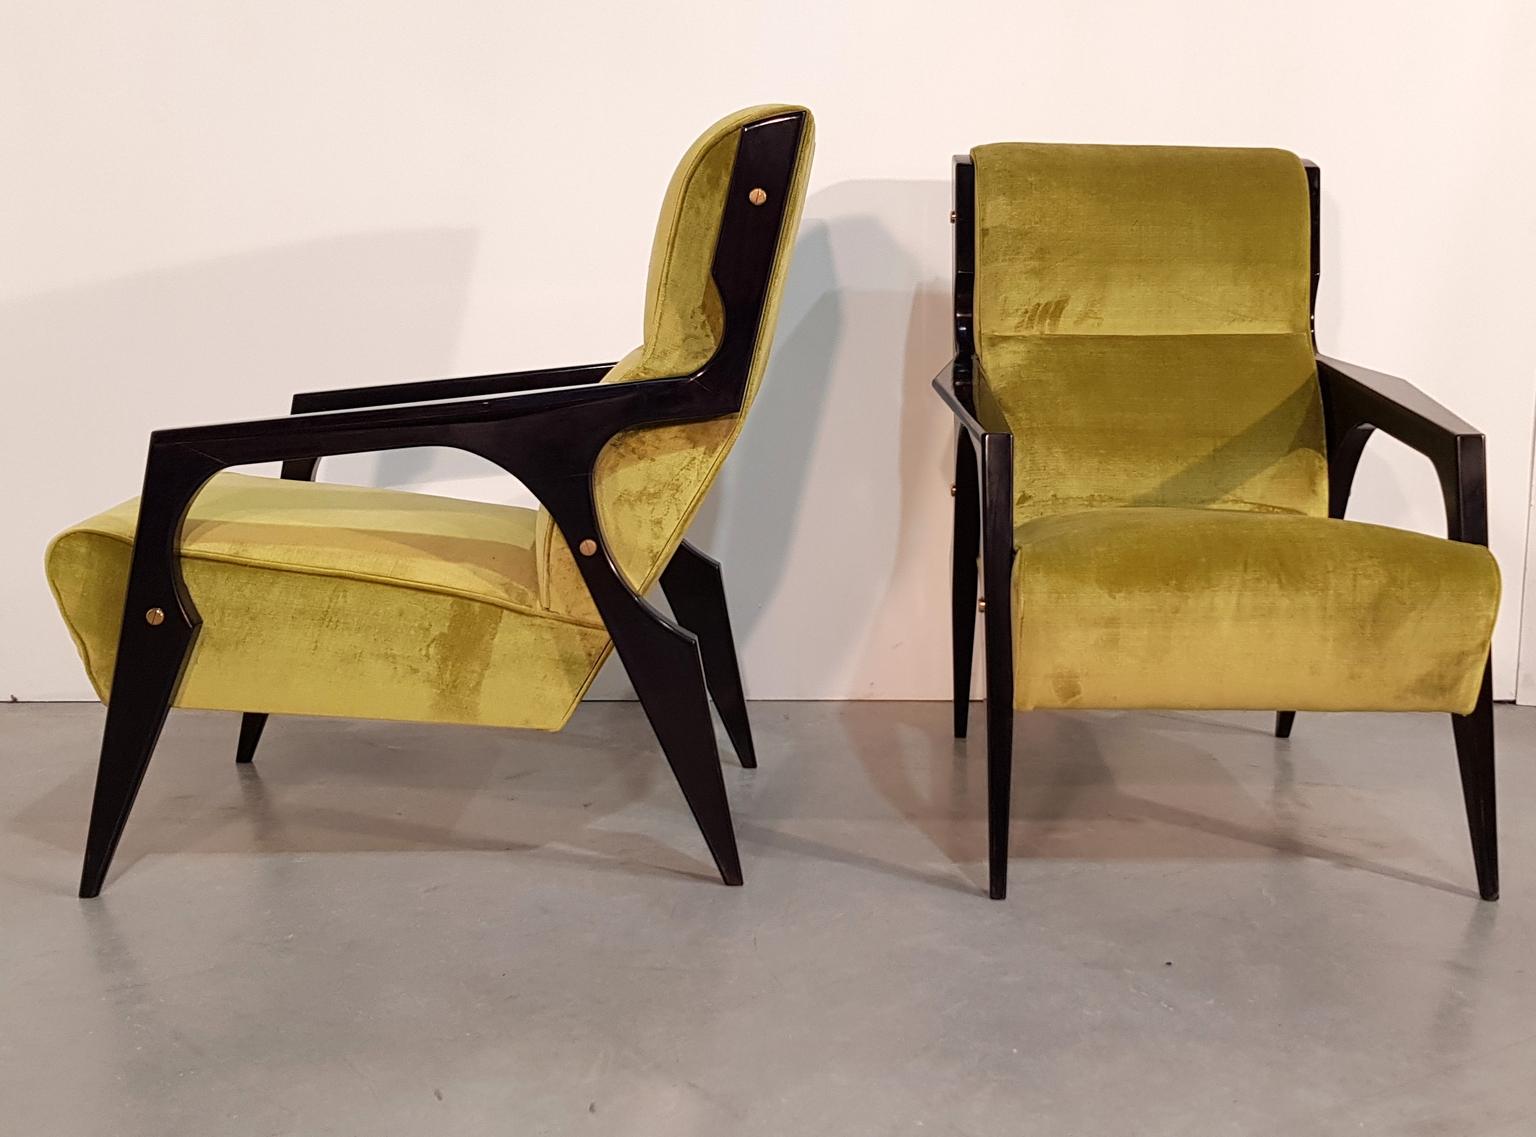 Mid-Century Modern Pair of Italian Midcentury Green Upholstered Armchairs by Gio Ponti, 1950s For Sale